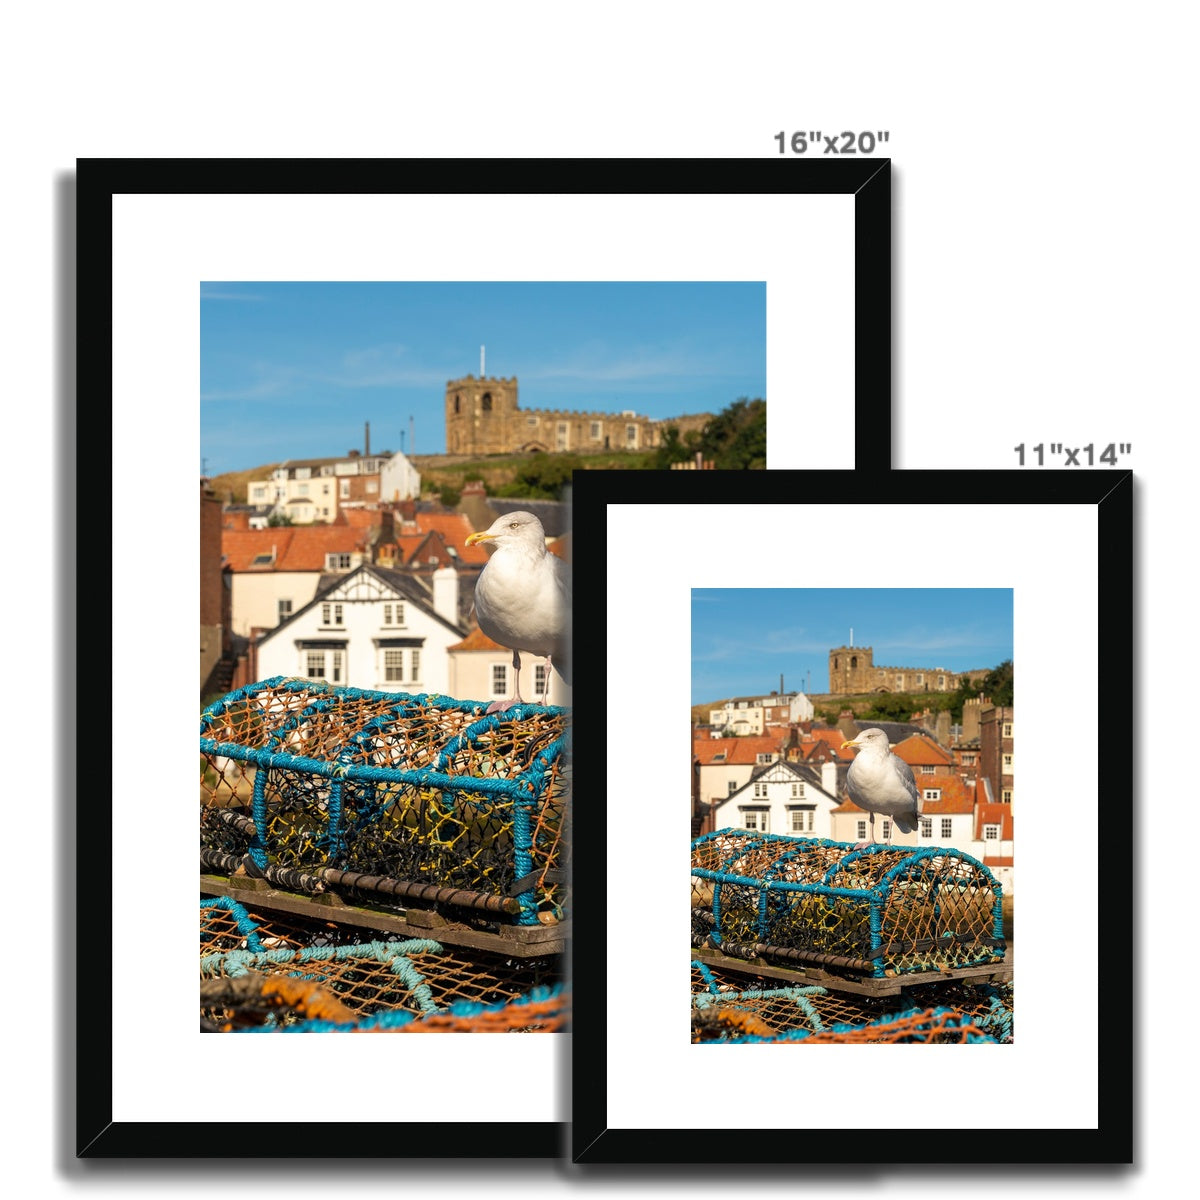 Seagull standing on a lobster trap on the quayside of Whitby harbour with St Mary's church in the distance. Whitby, UK. Framed & Mounted Print